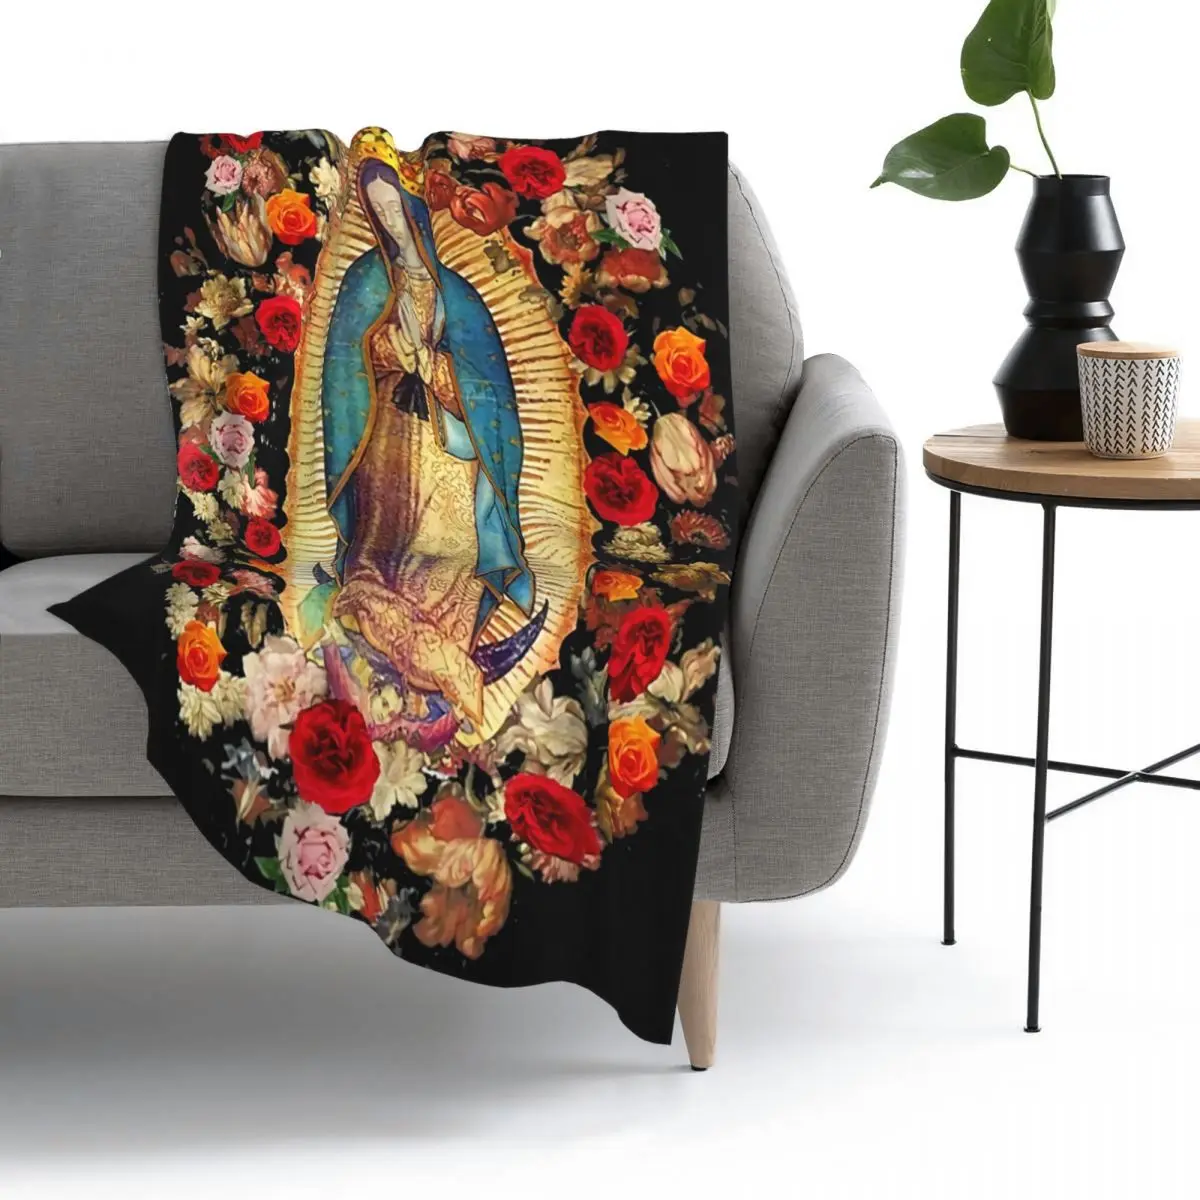 

Our Lady Of Guadalupe Virgin Mary Catholic Mexico Blanket Bedspread Bed Plaid Bedspread Hoodie Blanket Summer Bedspread